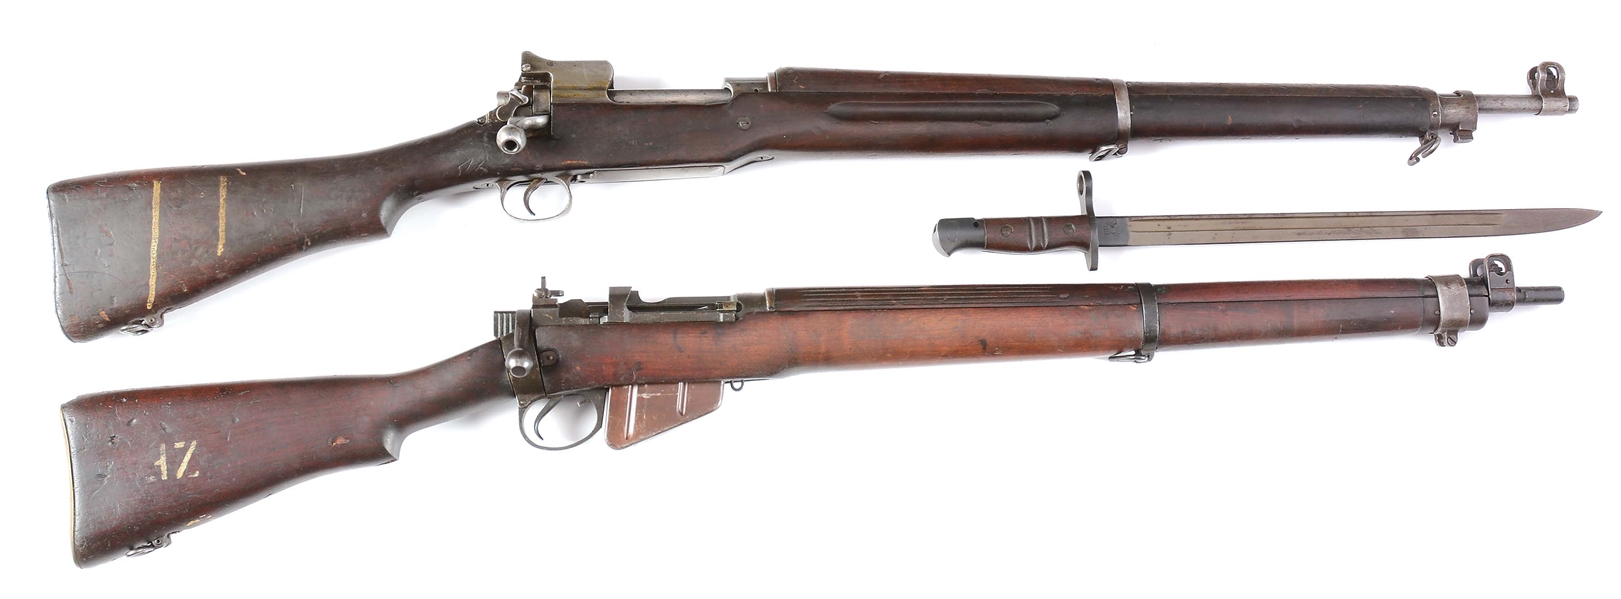 (C) LOT OF 2: ENFIELD RIFLES - BRITISH AND AMERICAN.